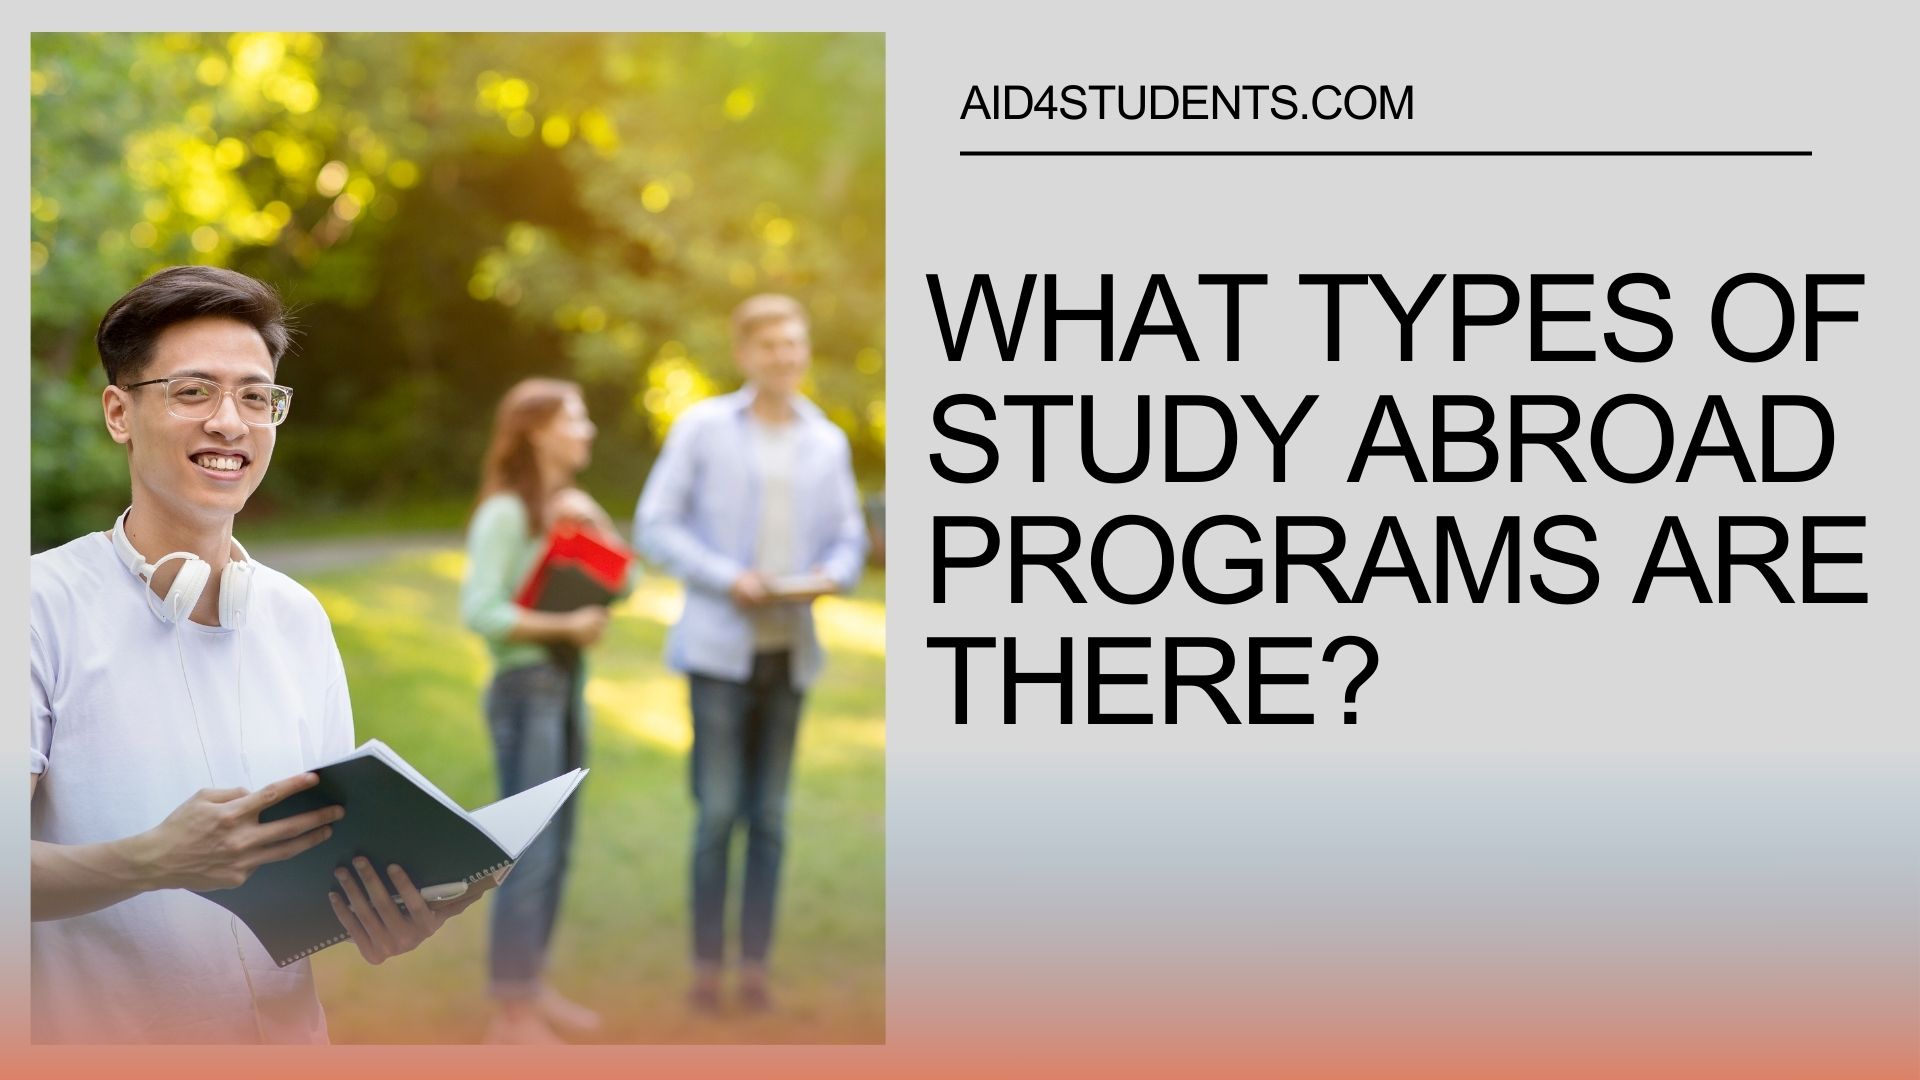 What Types of Study Abroad Programs Are There?